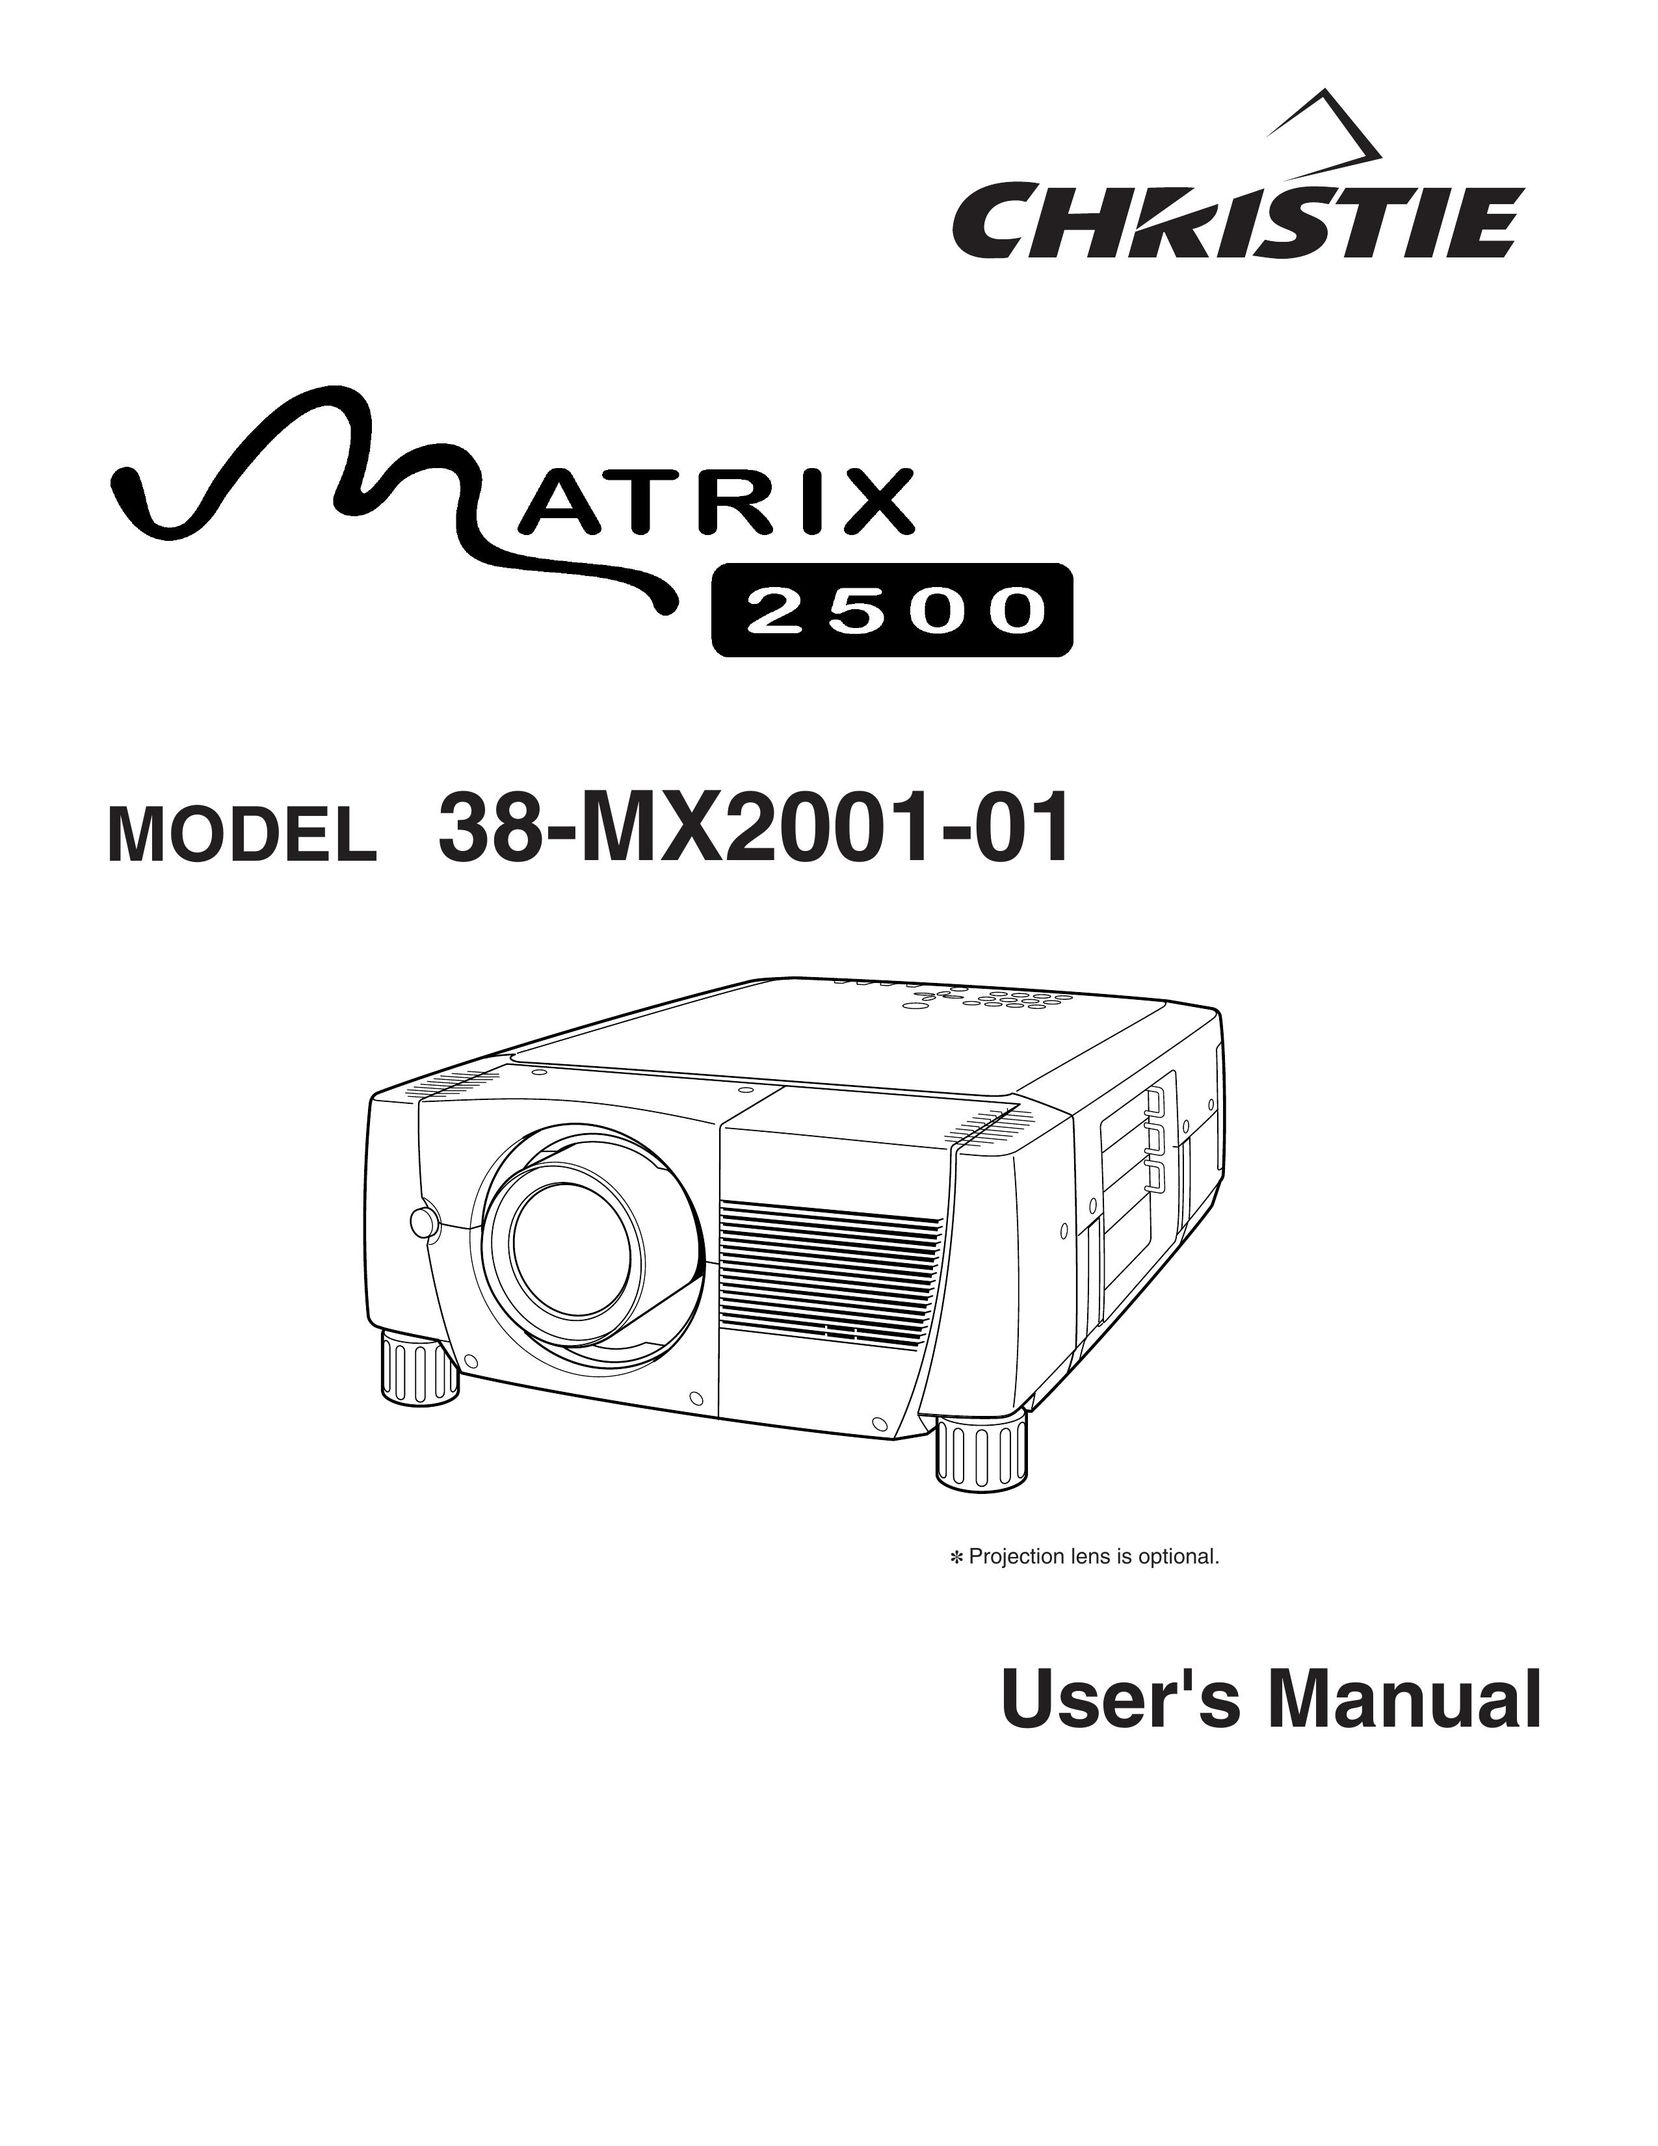 Christie Digital Systems 38-MX2001-01 Projector User Manual